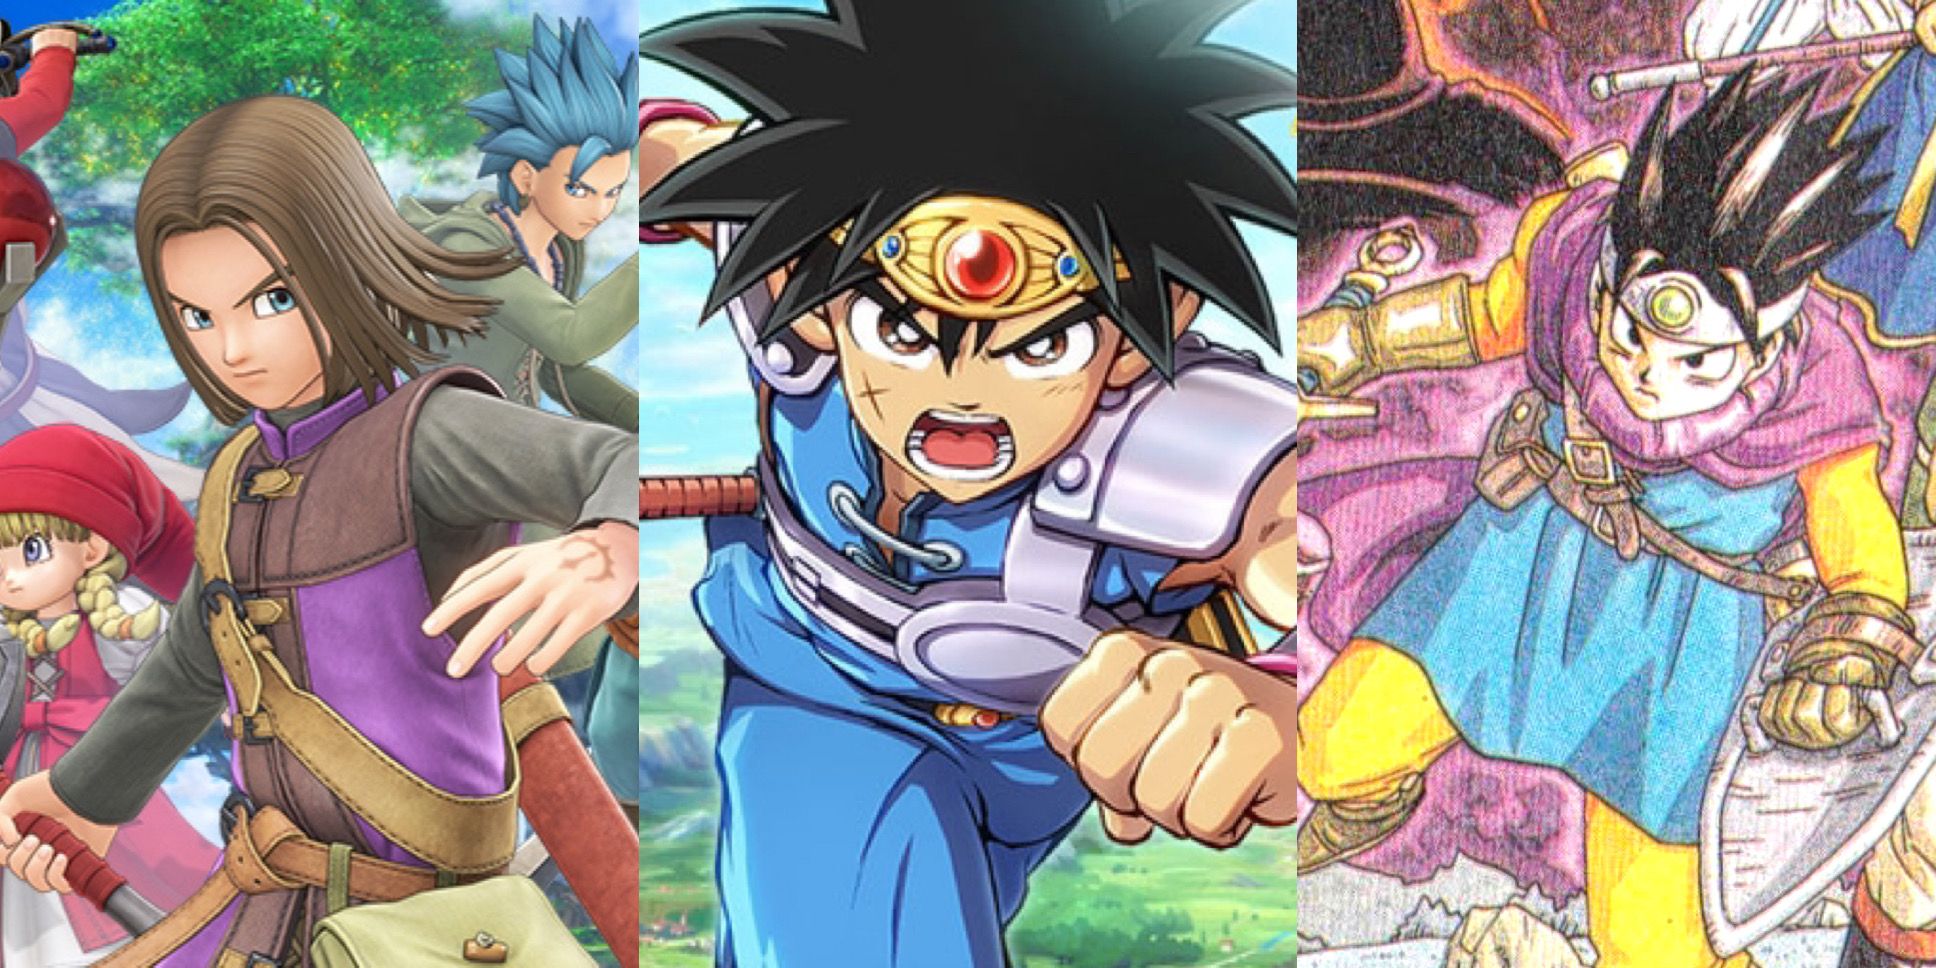 10 Things Dragon Quest The Adventures Of Dai Borrows From The Game Series